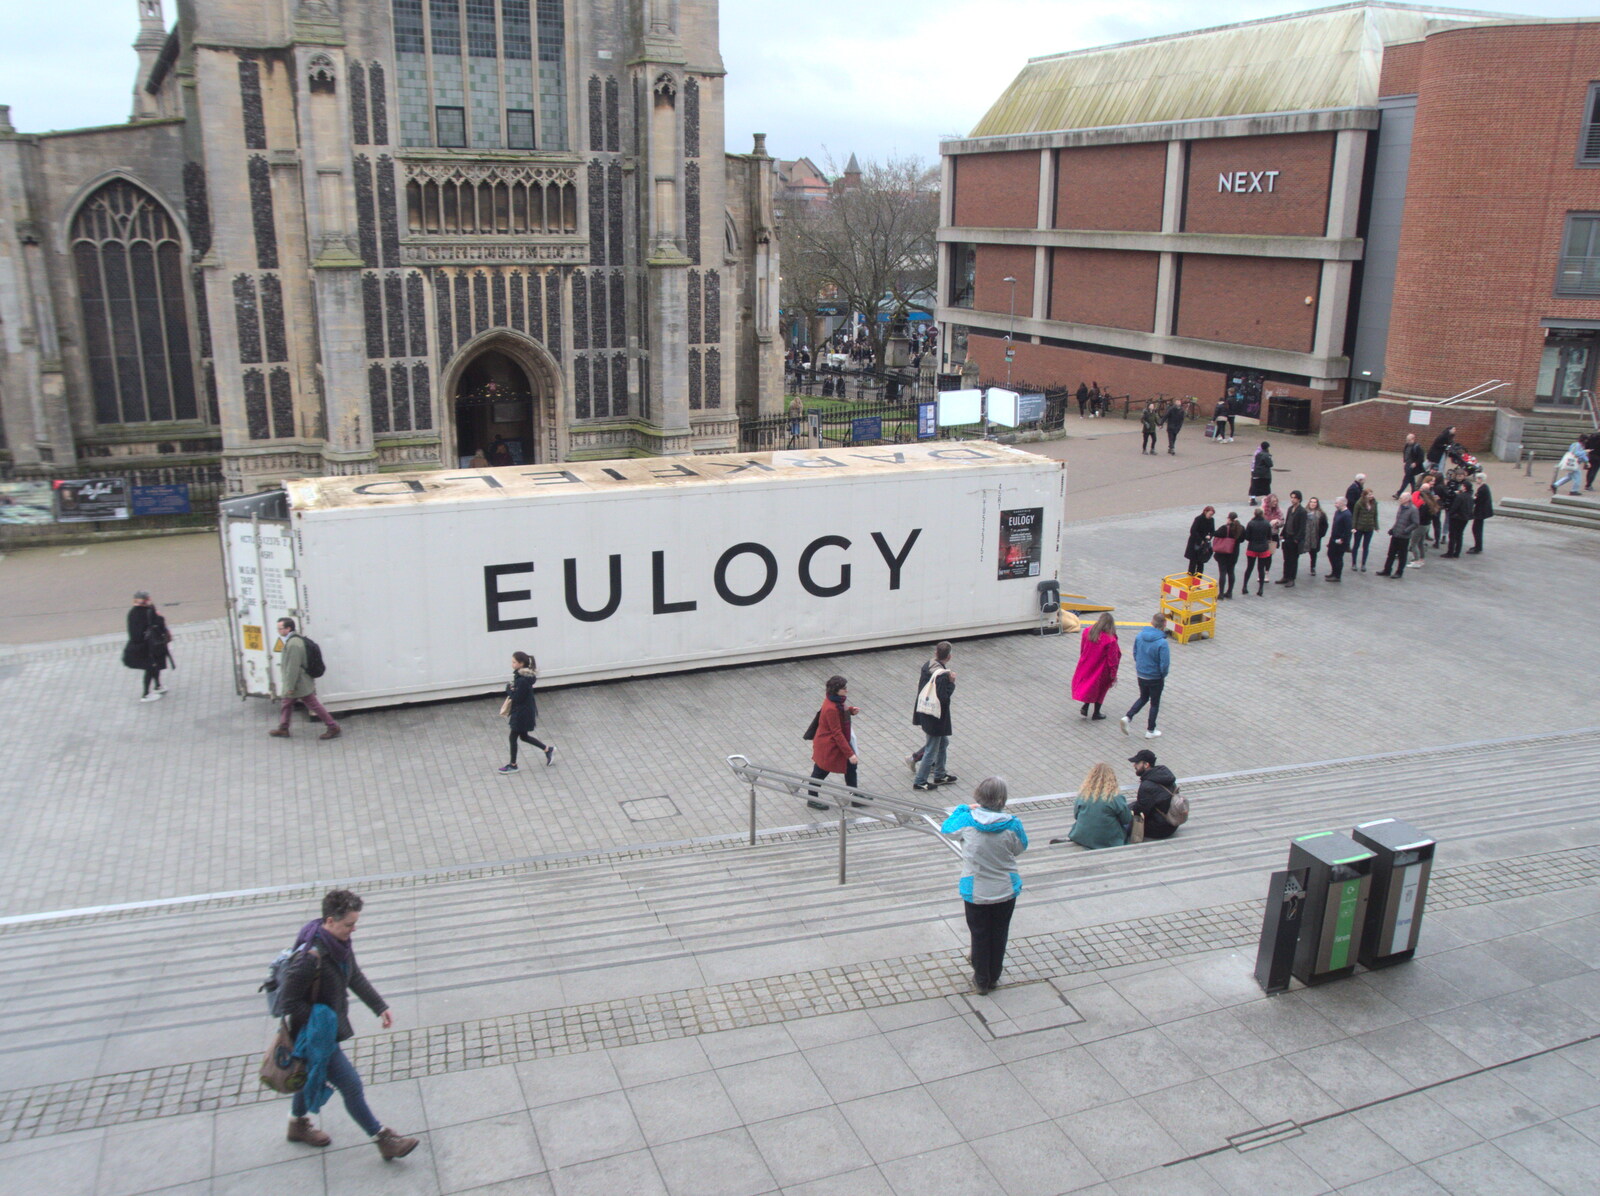 There's some sort of Eulogy installation outside from It's a Stitch Up: A Trip to Norwich, Norfolk - 18th March 2023